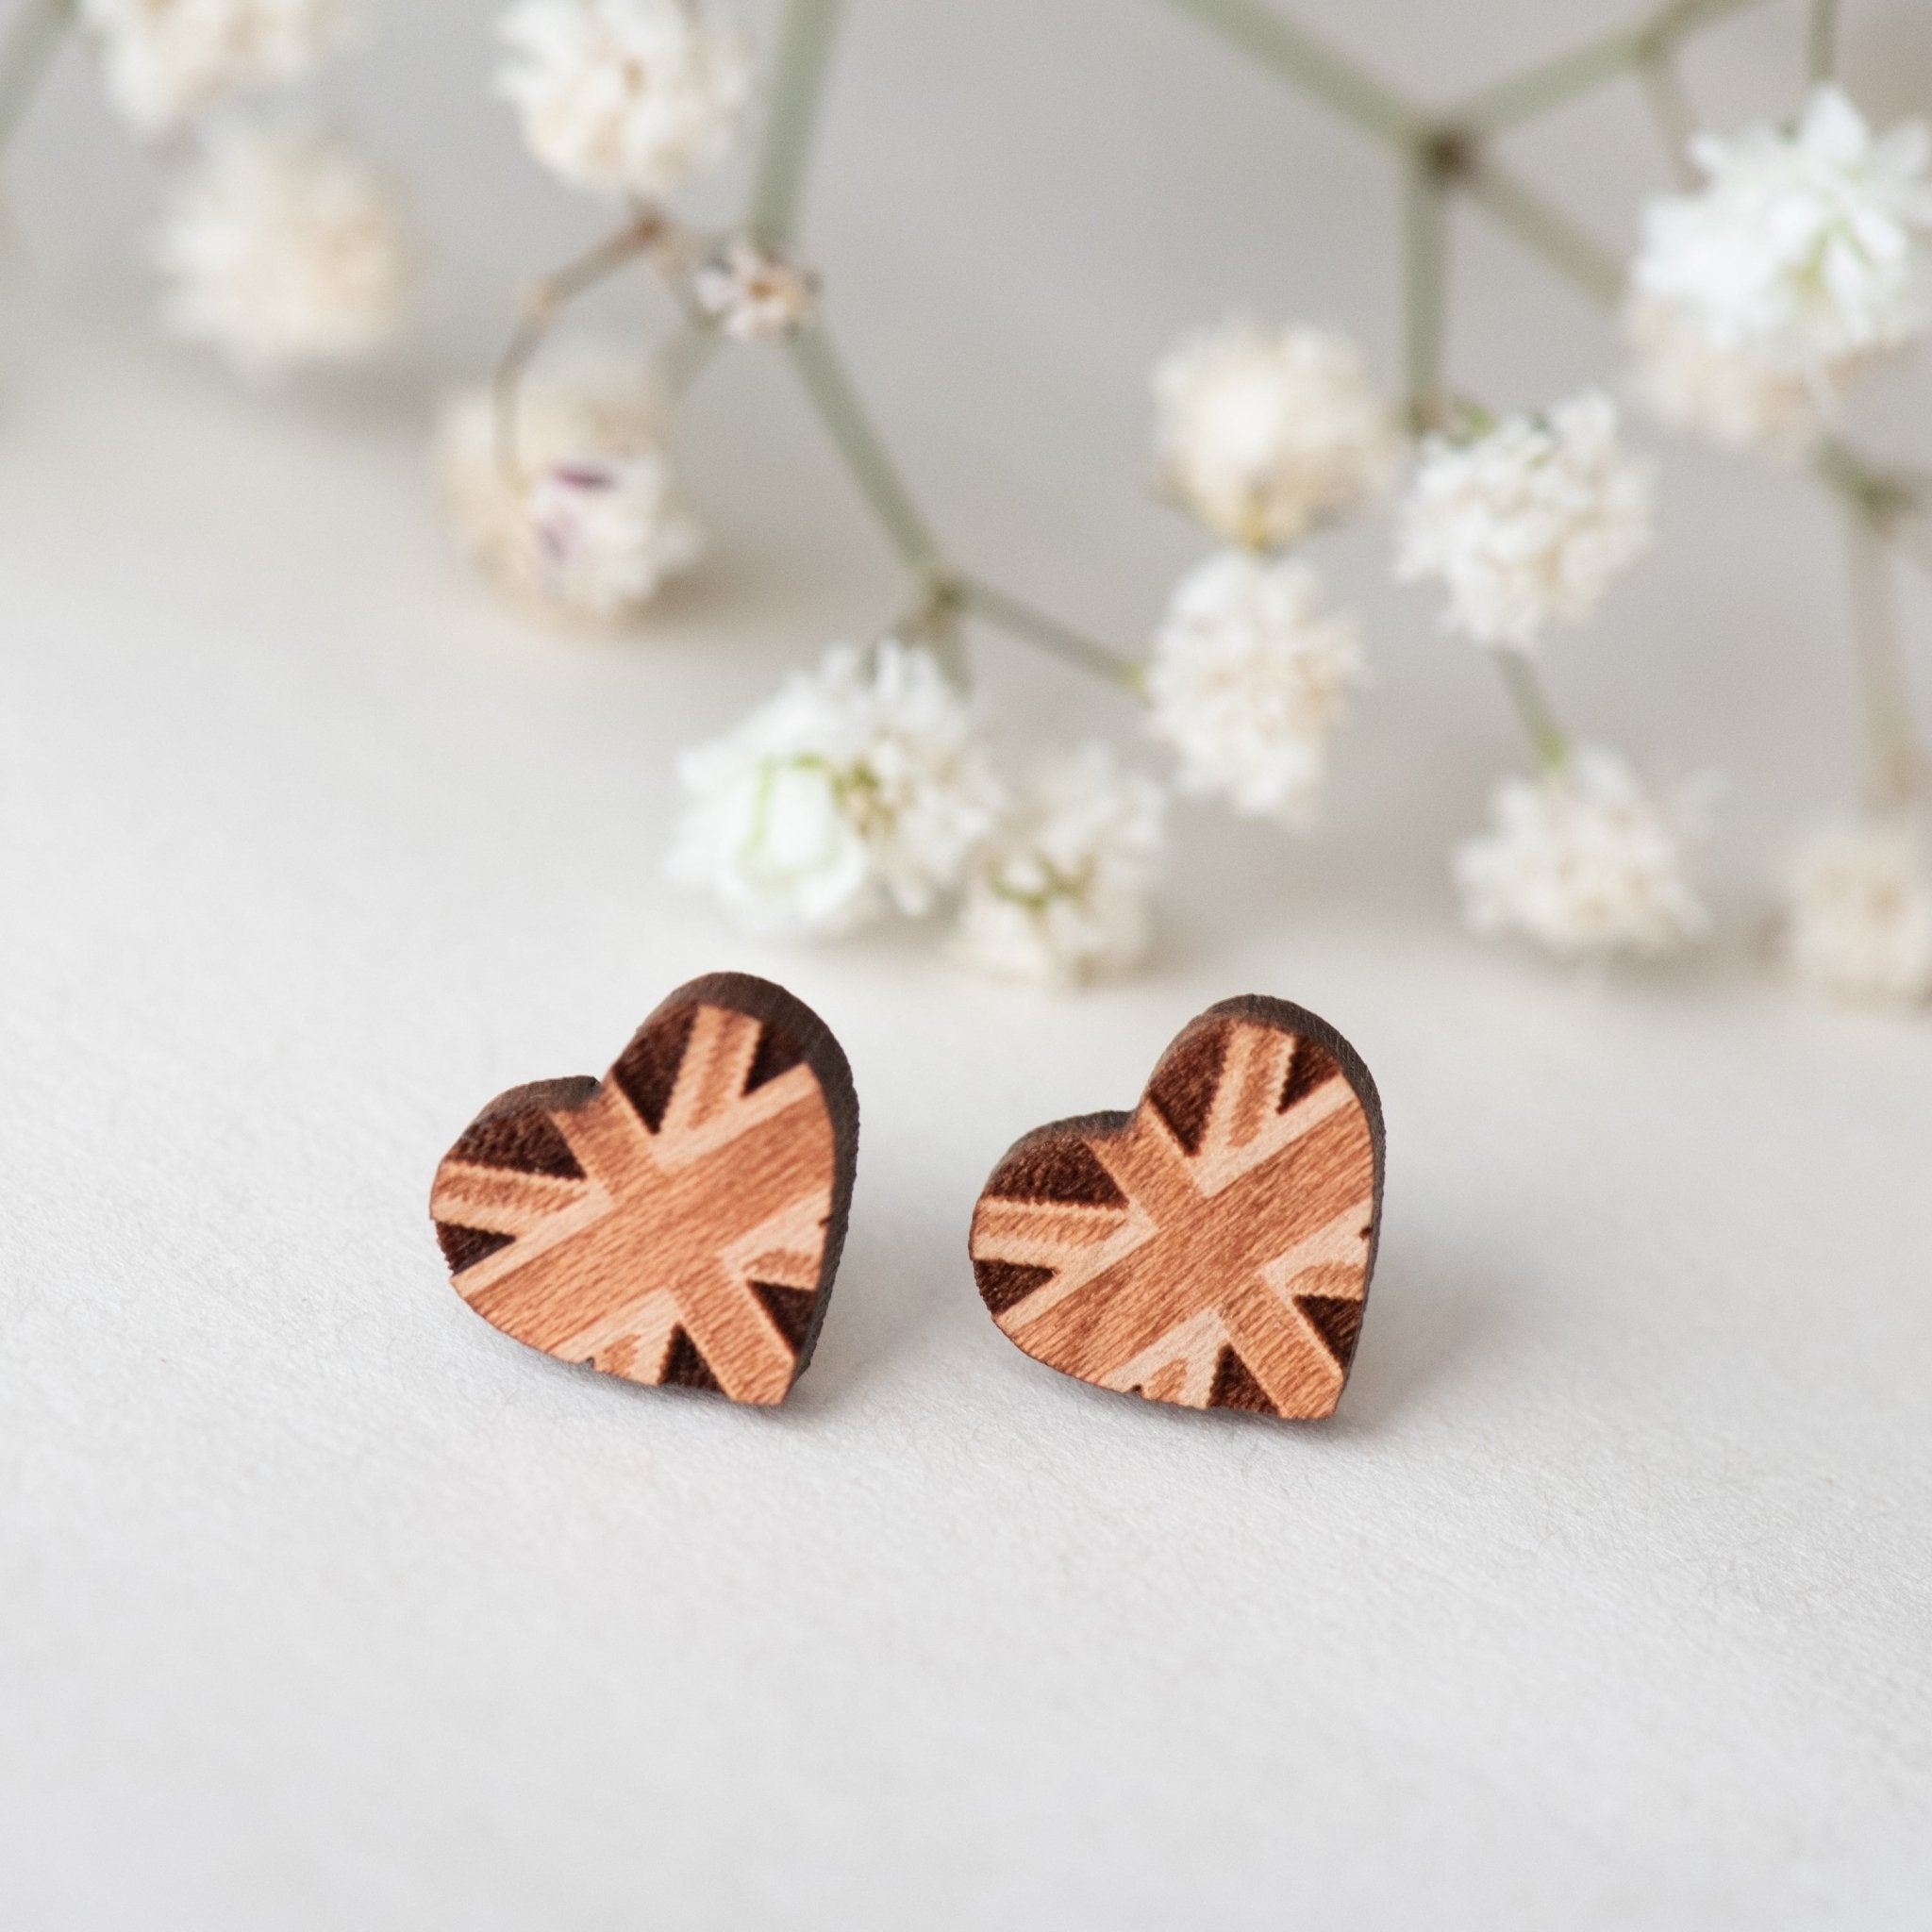 Union Jack Heart Cherry Wood Stud Earrings - ET15083 - Robin Valley Official Store